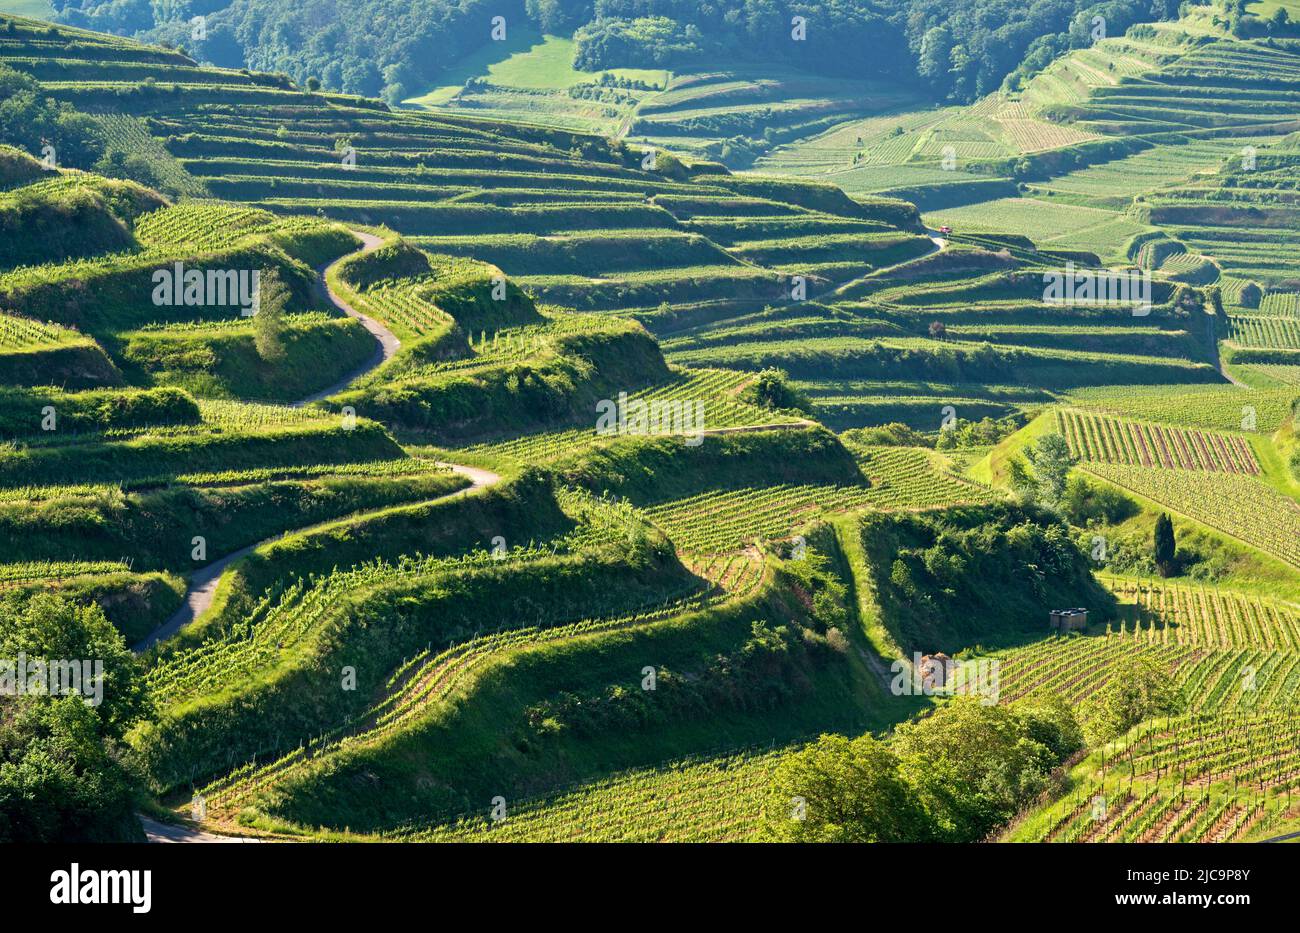 Trellis cultivation of vines on small terraces in the erosion-prone loess soil of the Kaiserstuhl area, Oberbergen,Baden-Württemberg, Germany Stock Photo